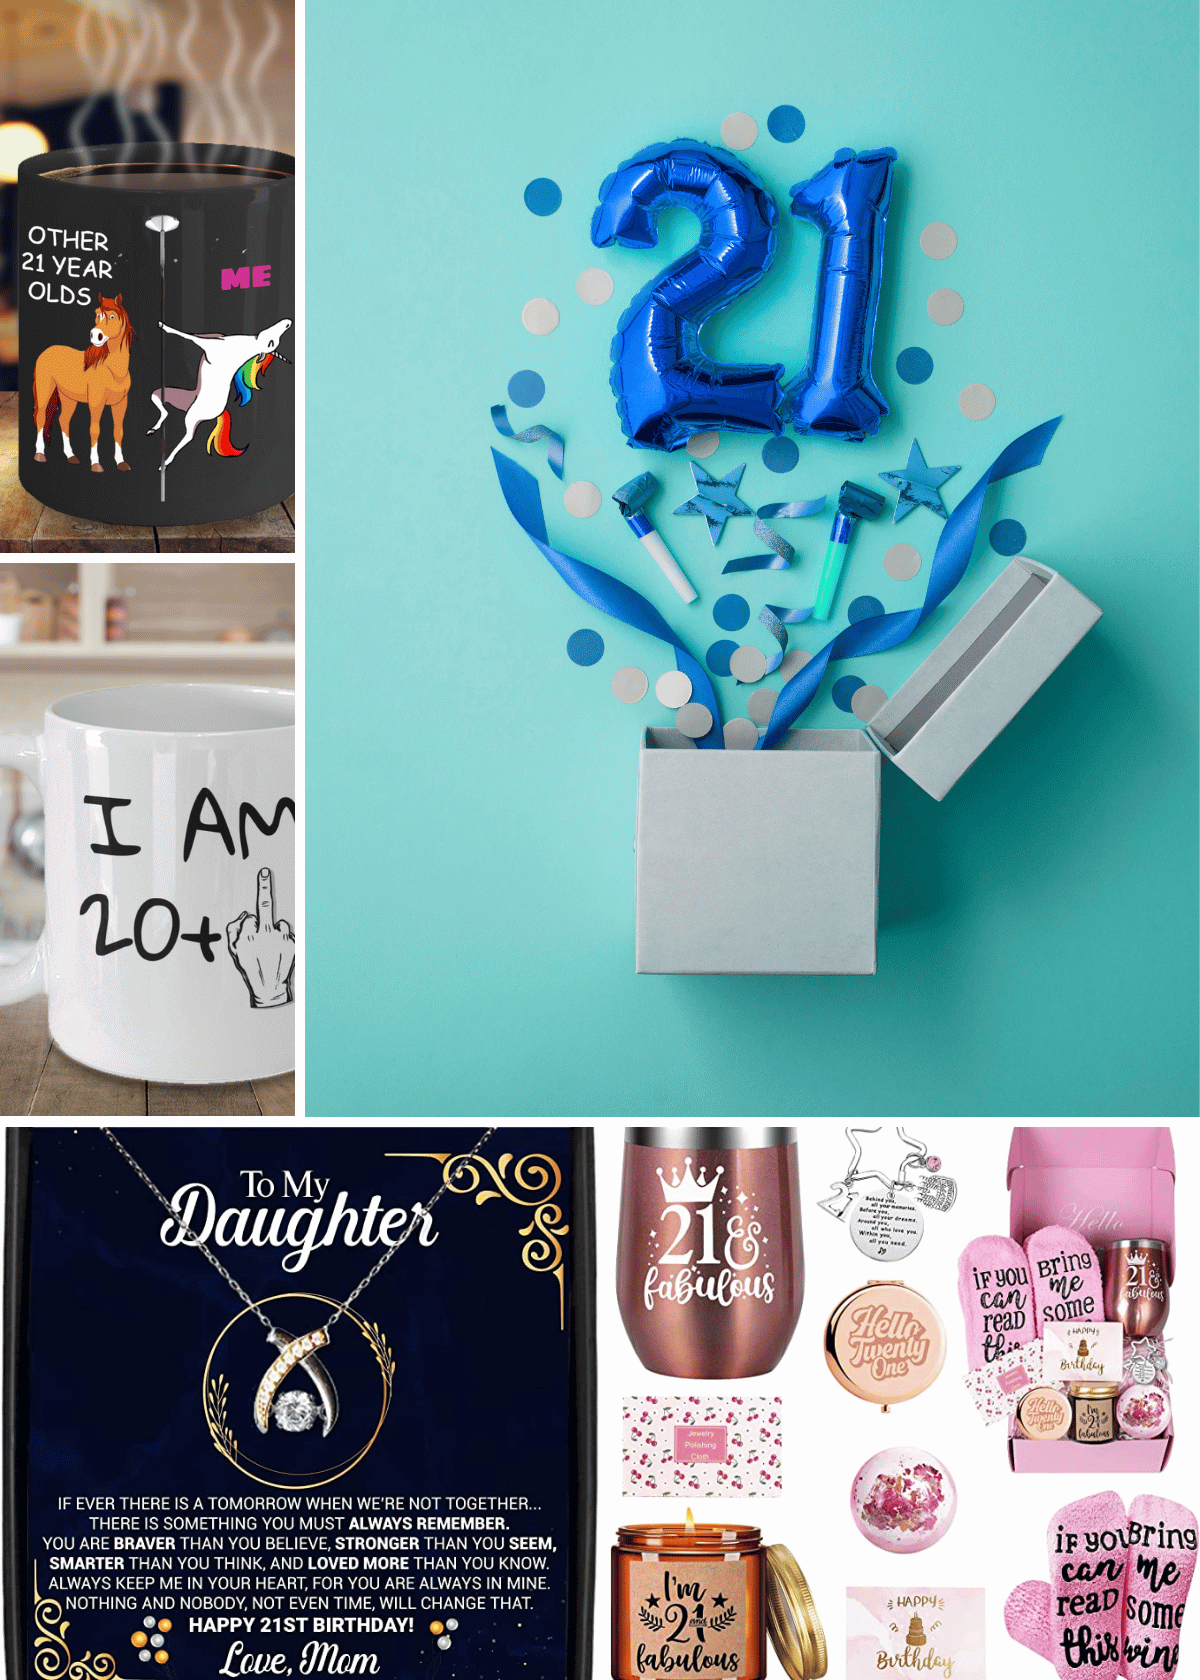 21st Birthday Gifts for Her: The Ultimate Guide to Finding the Perfect Gift on Amazon